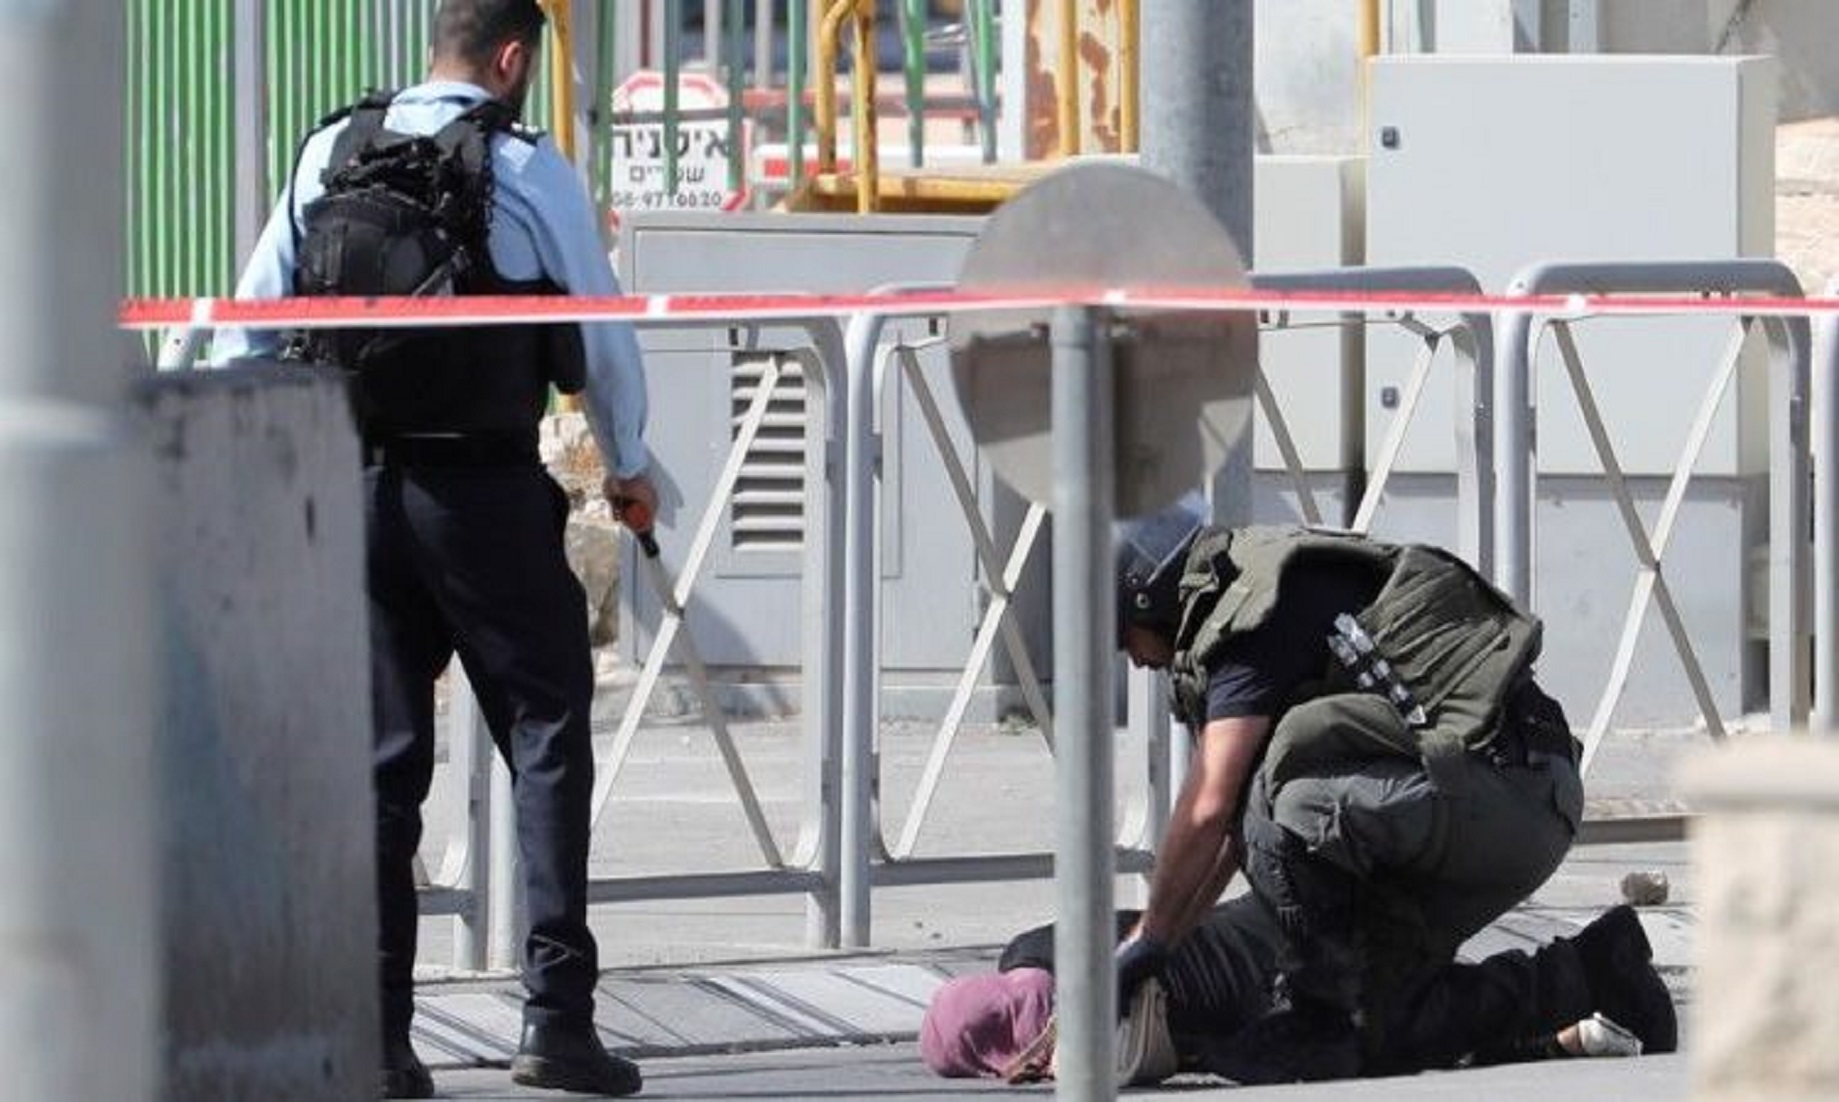 Palestinian Woman Shot Dead At West Bank Checkpoint By Israeli Civilian Guard